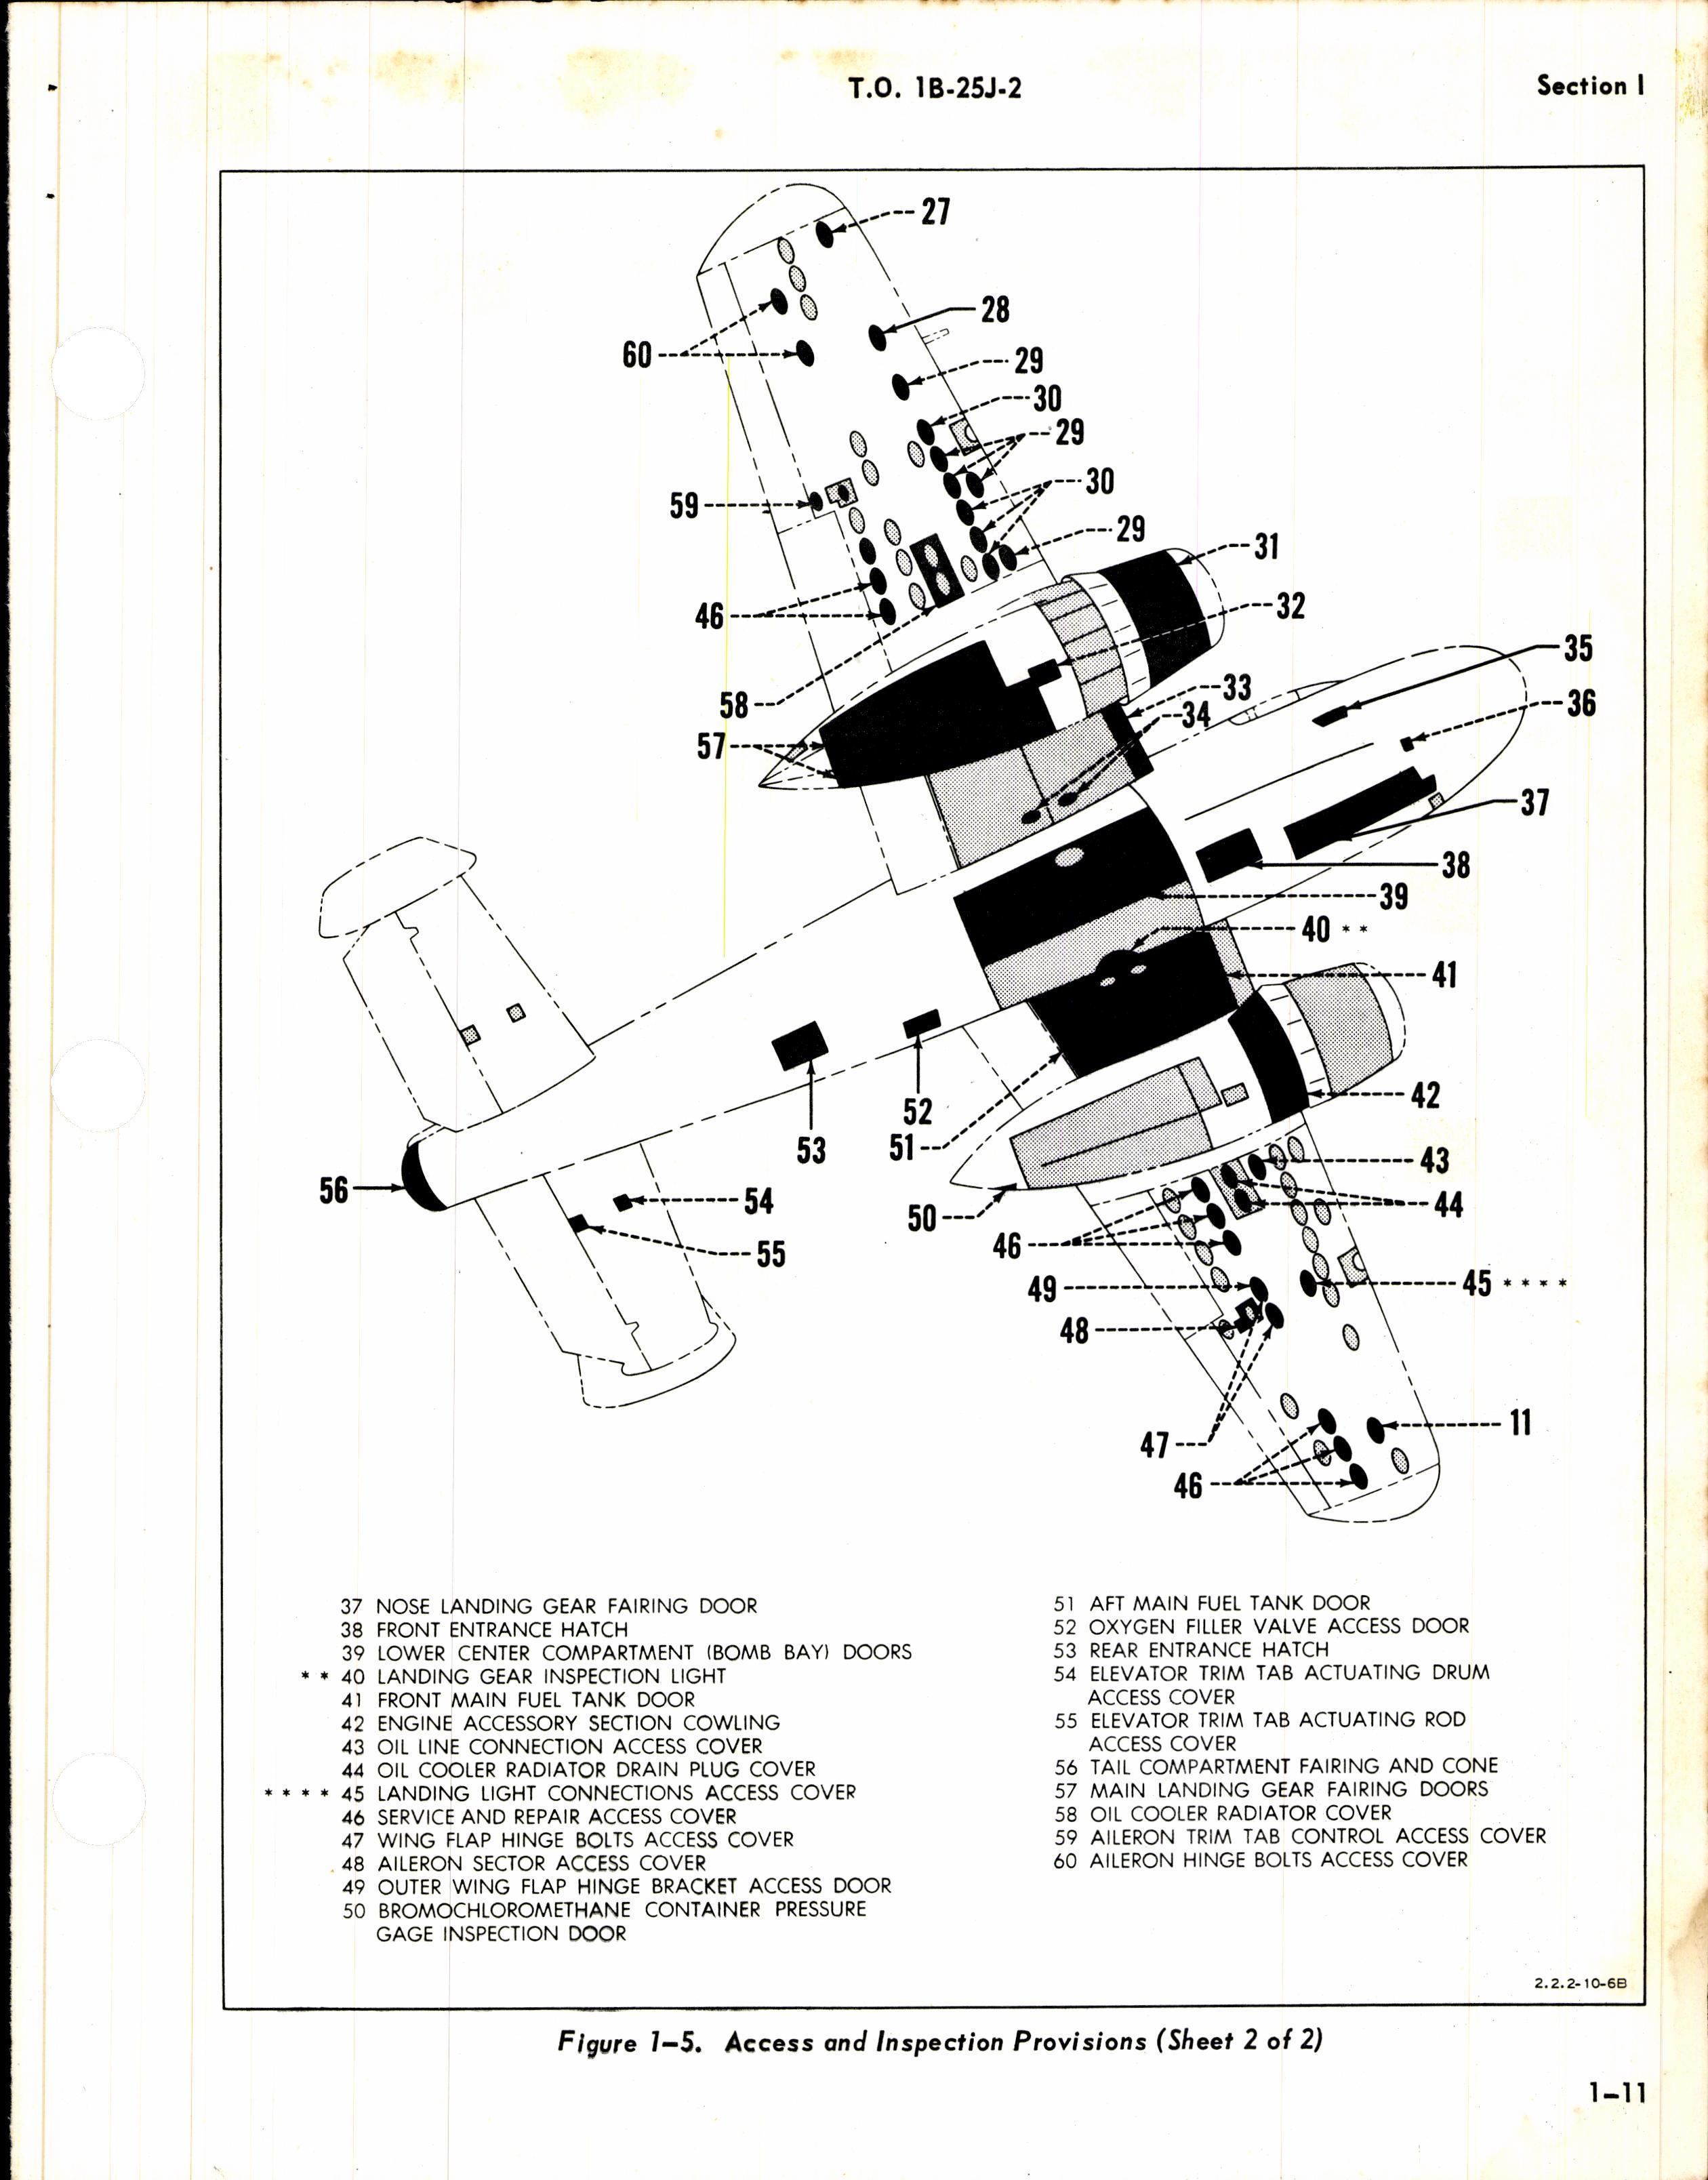 Sample page 21 from AirCorps Library document: Maintenance Instructions for B-25J, B-25L, and B-25N